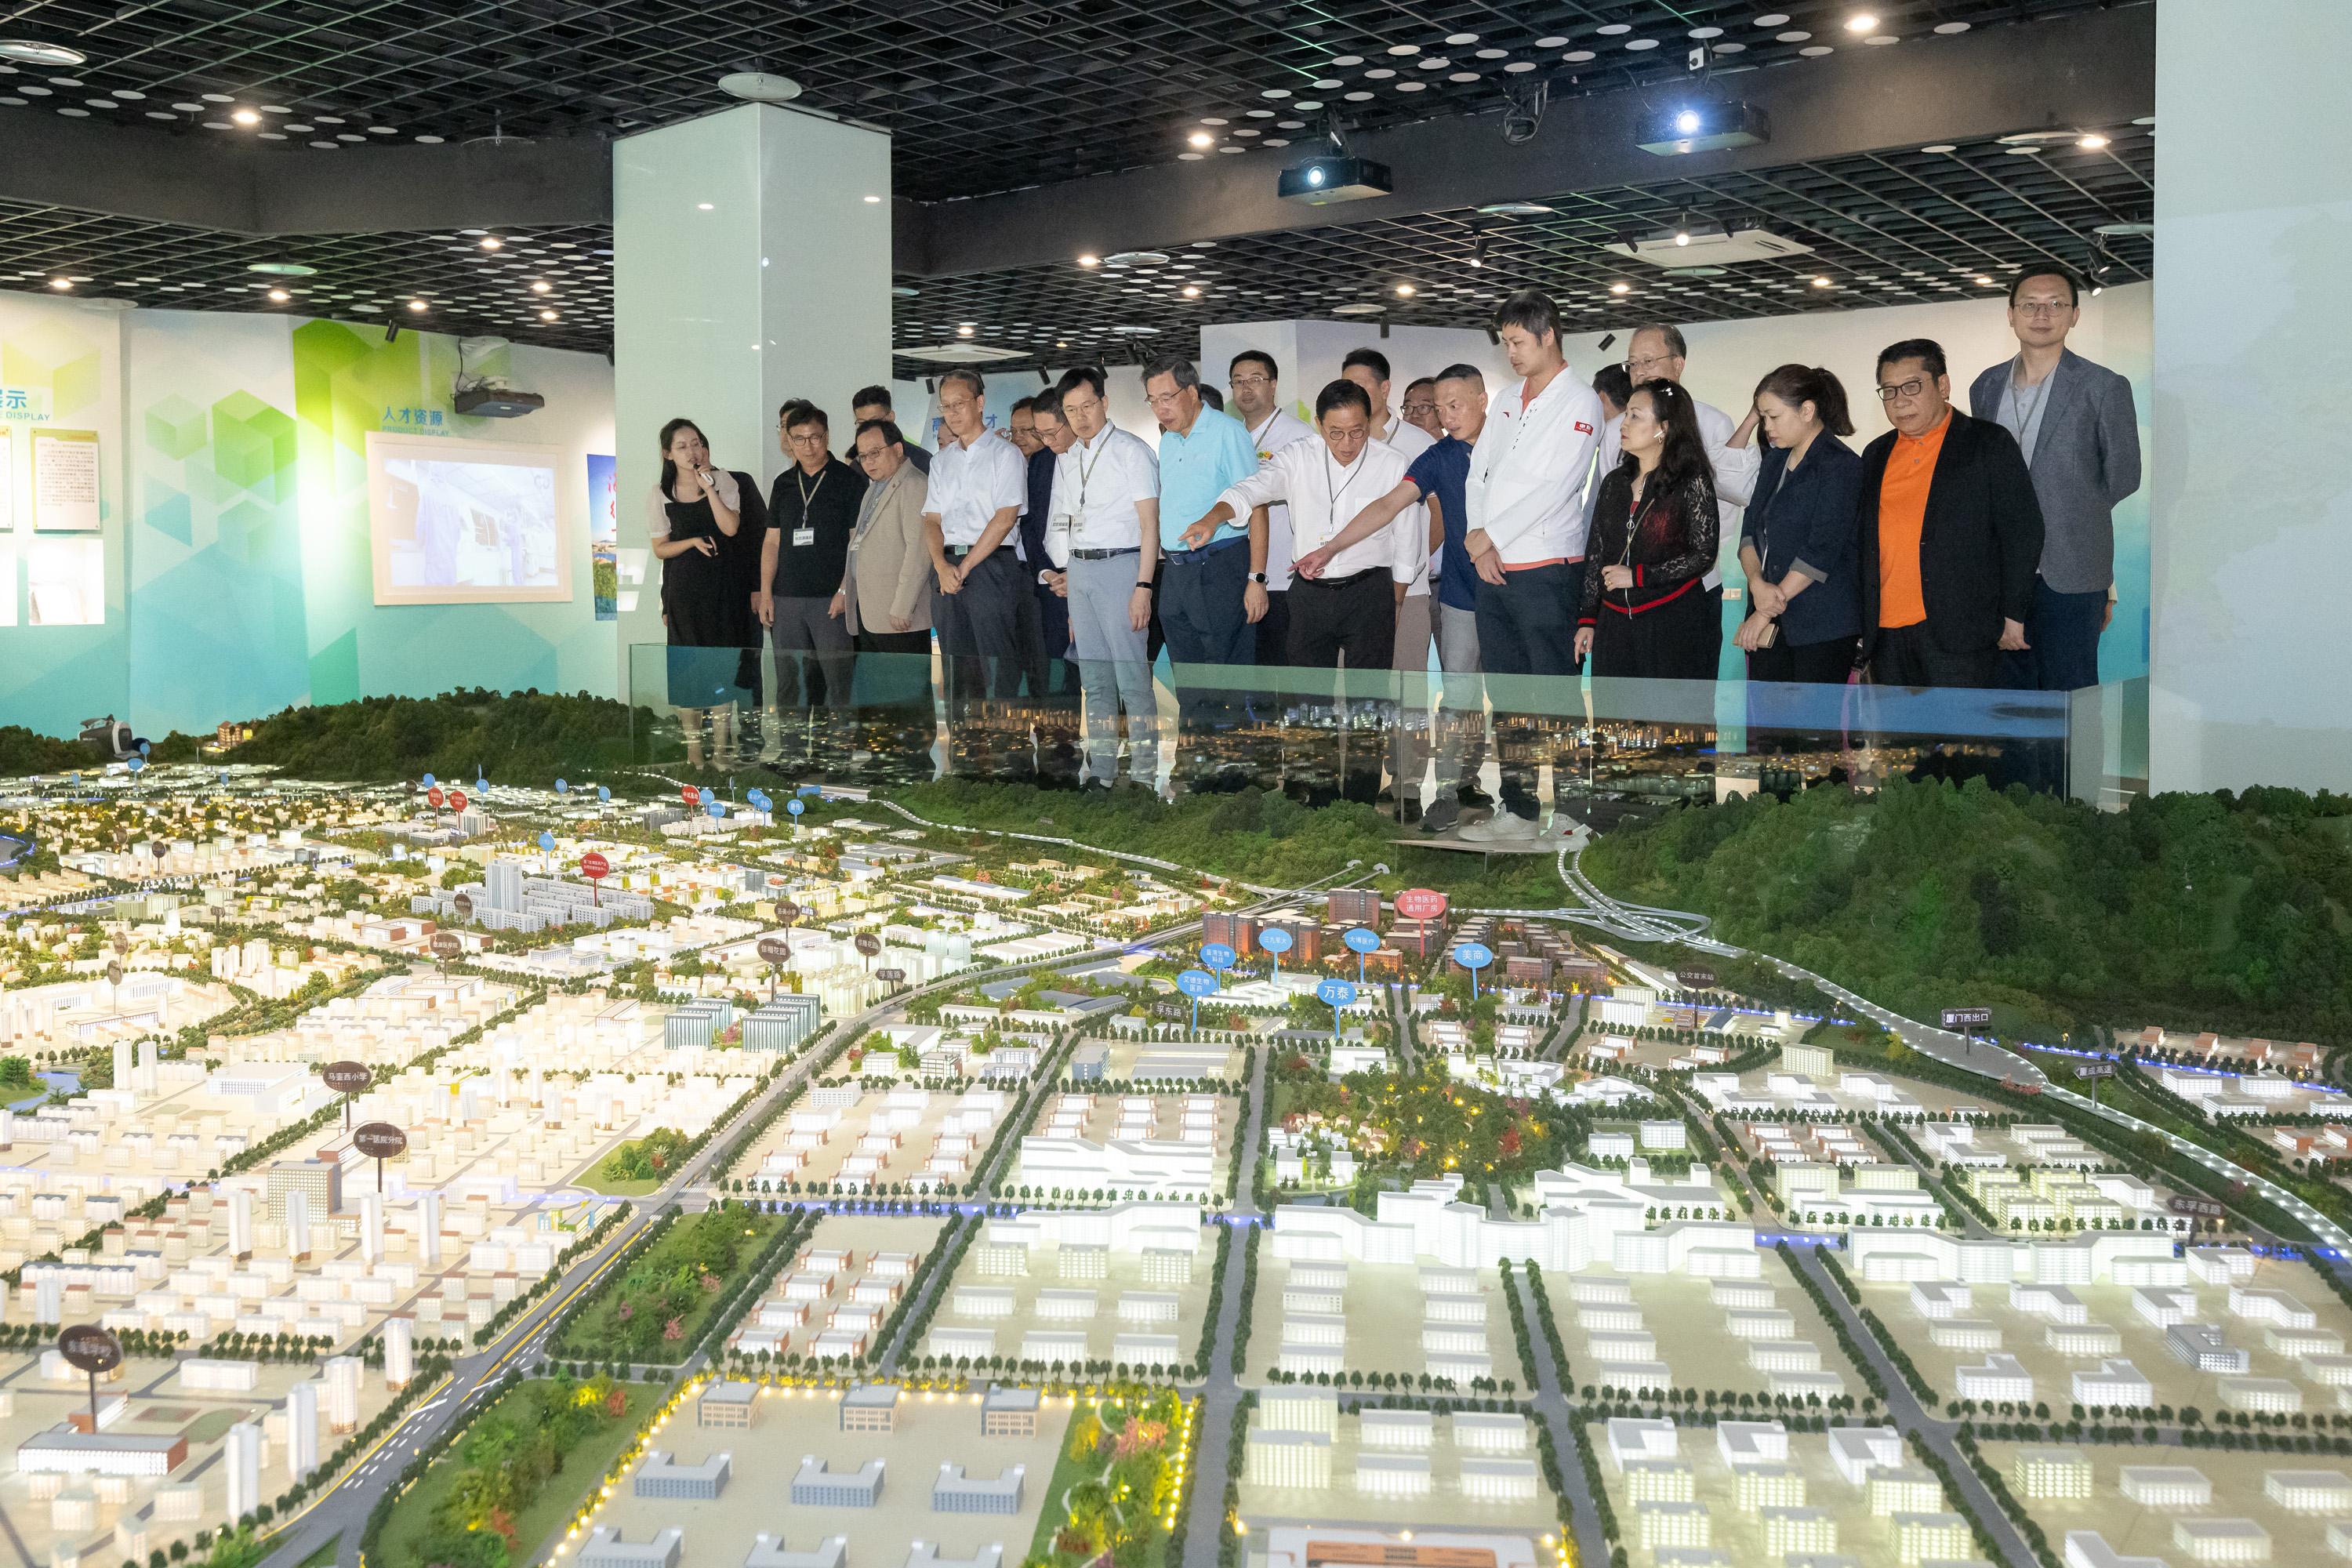 The delegation of the Legislative Council (LegCo), led by the LegCo President, Mr Andrew Leung, continues its study visit in Fujian and visits Xiamen today (July 17). Photo shows the delegation visiting Xiamen Bio Bay in Haicang District.